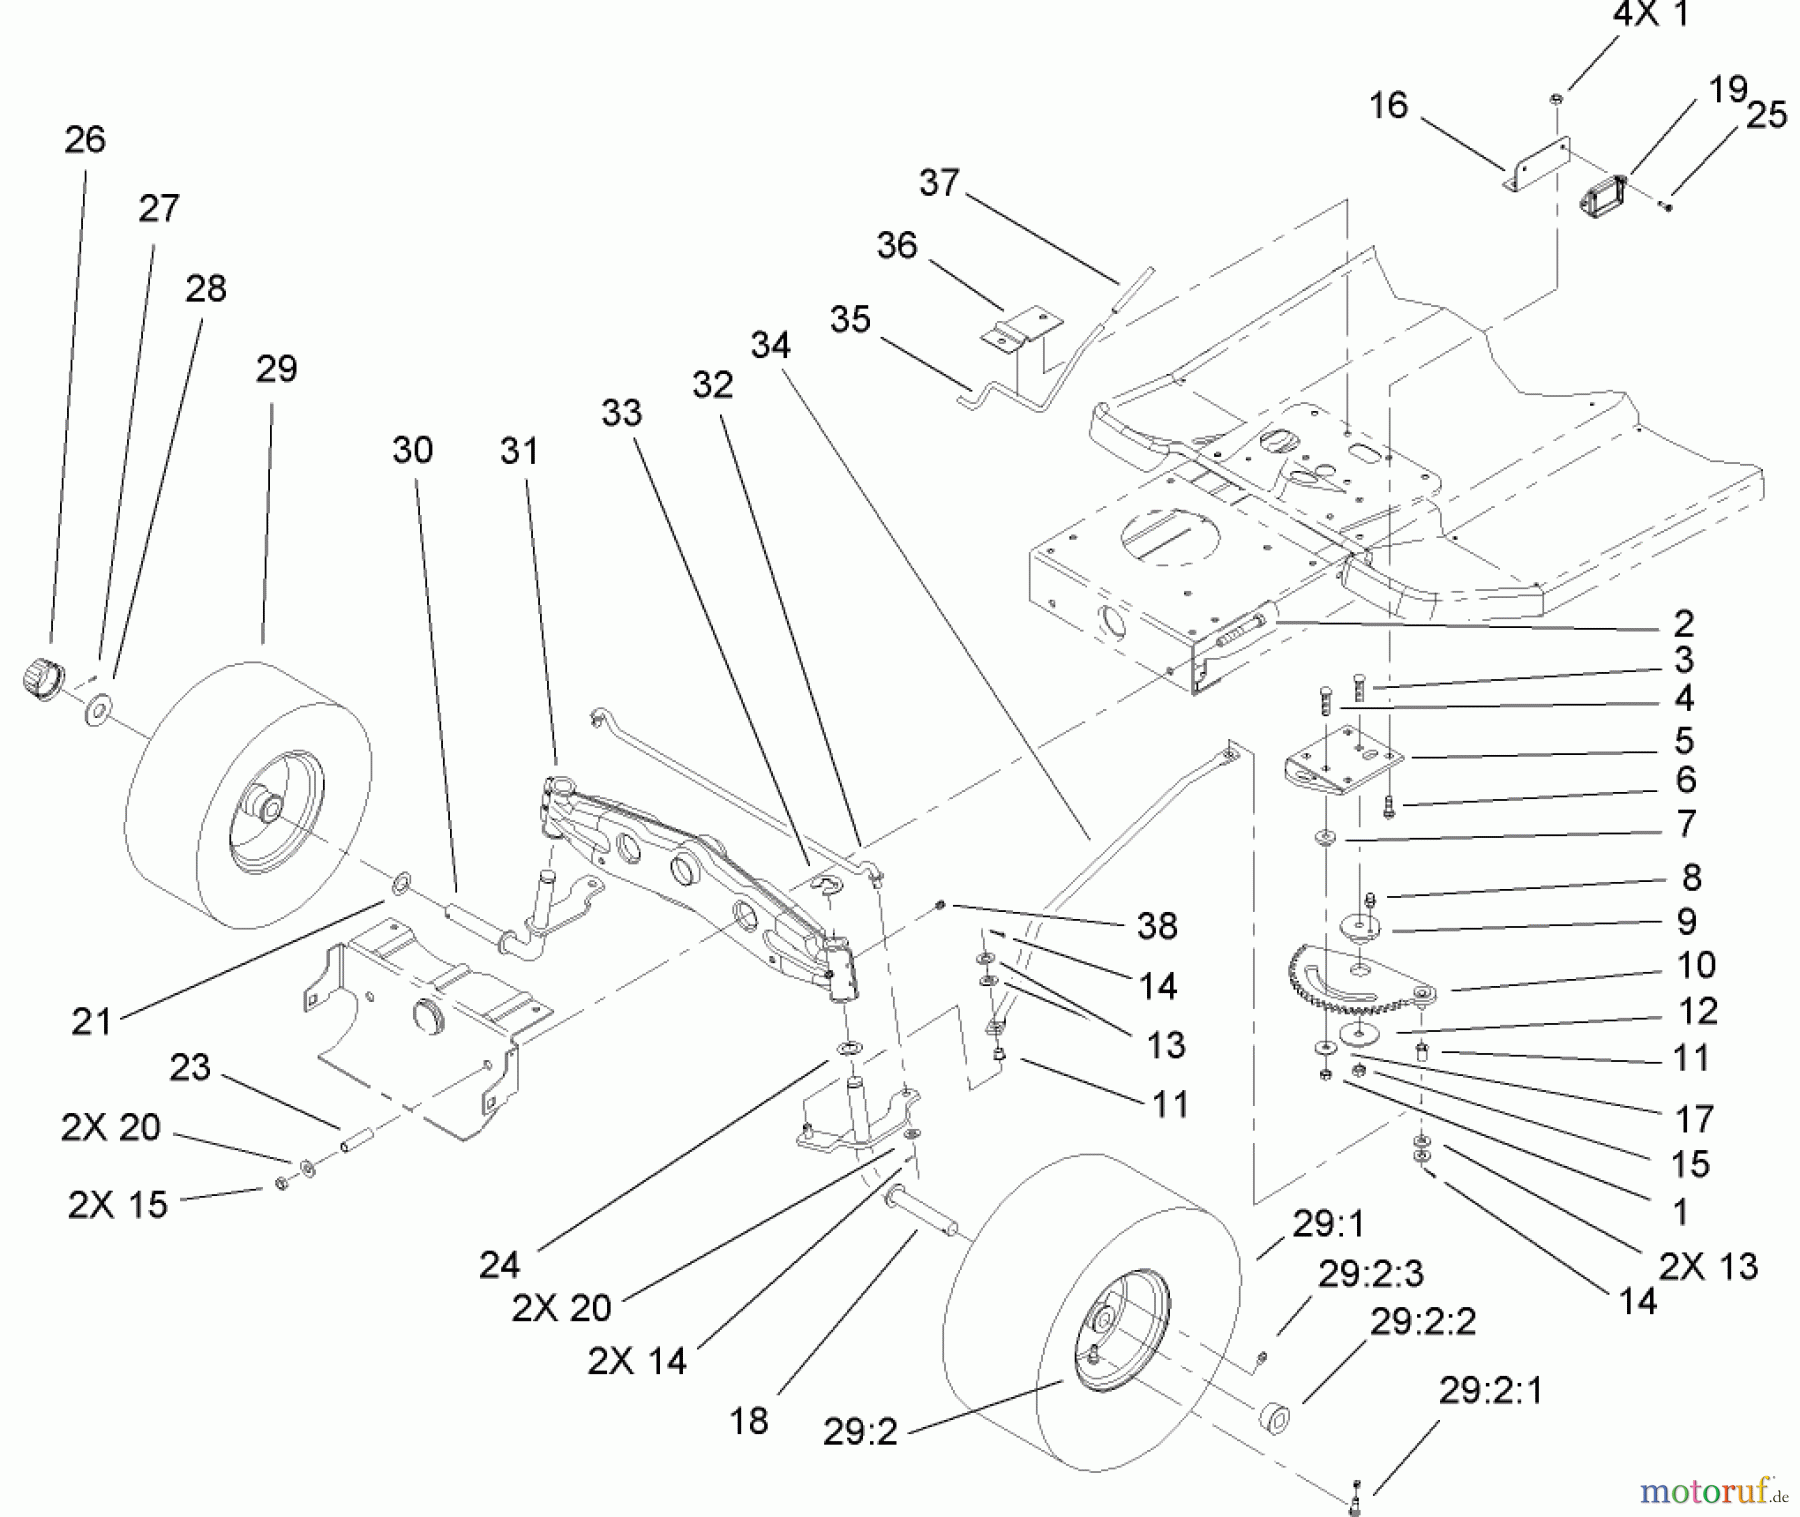  Toro Neu Mowers, Lawn & Garden Tractor Seite 1 71209 (13-32XLE) - Toro 13-32XLE Lawn Tractor, 2004 (240000001-240999999) STEERING COMPONENT ASSEMBLY